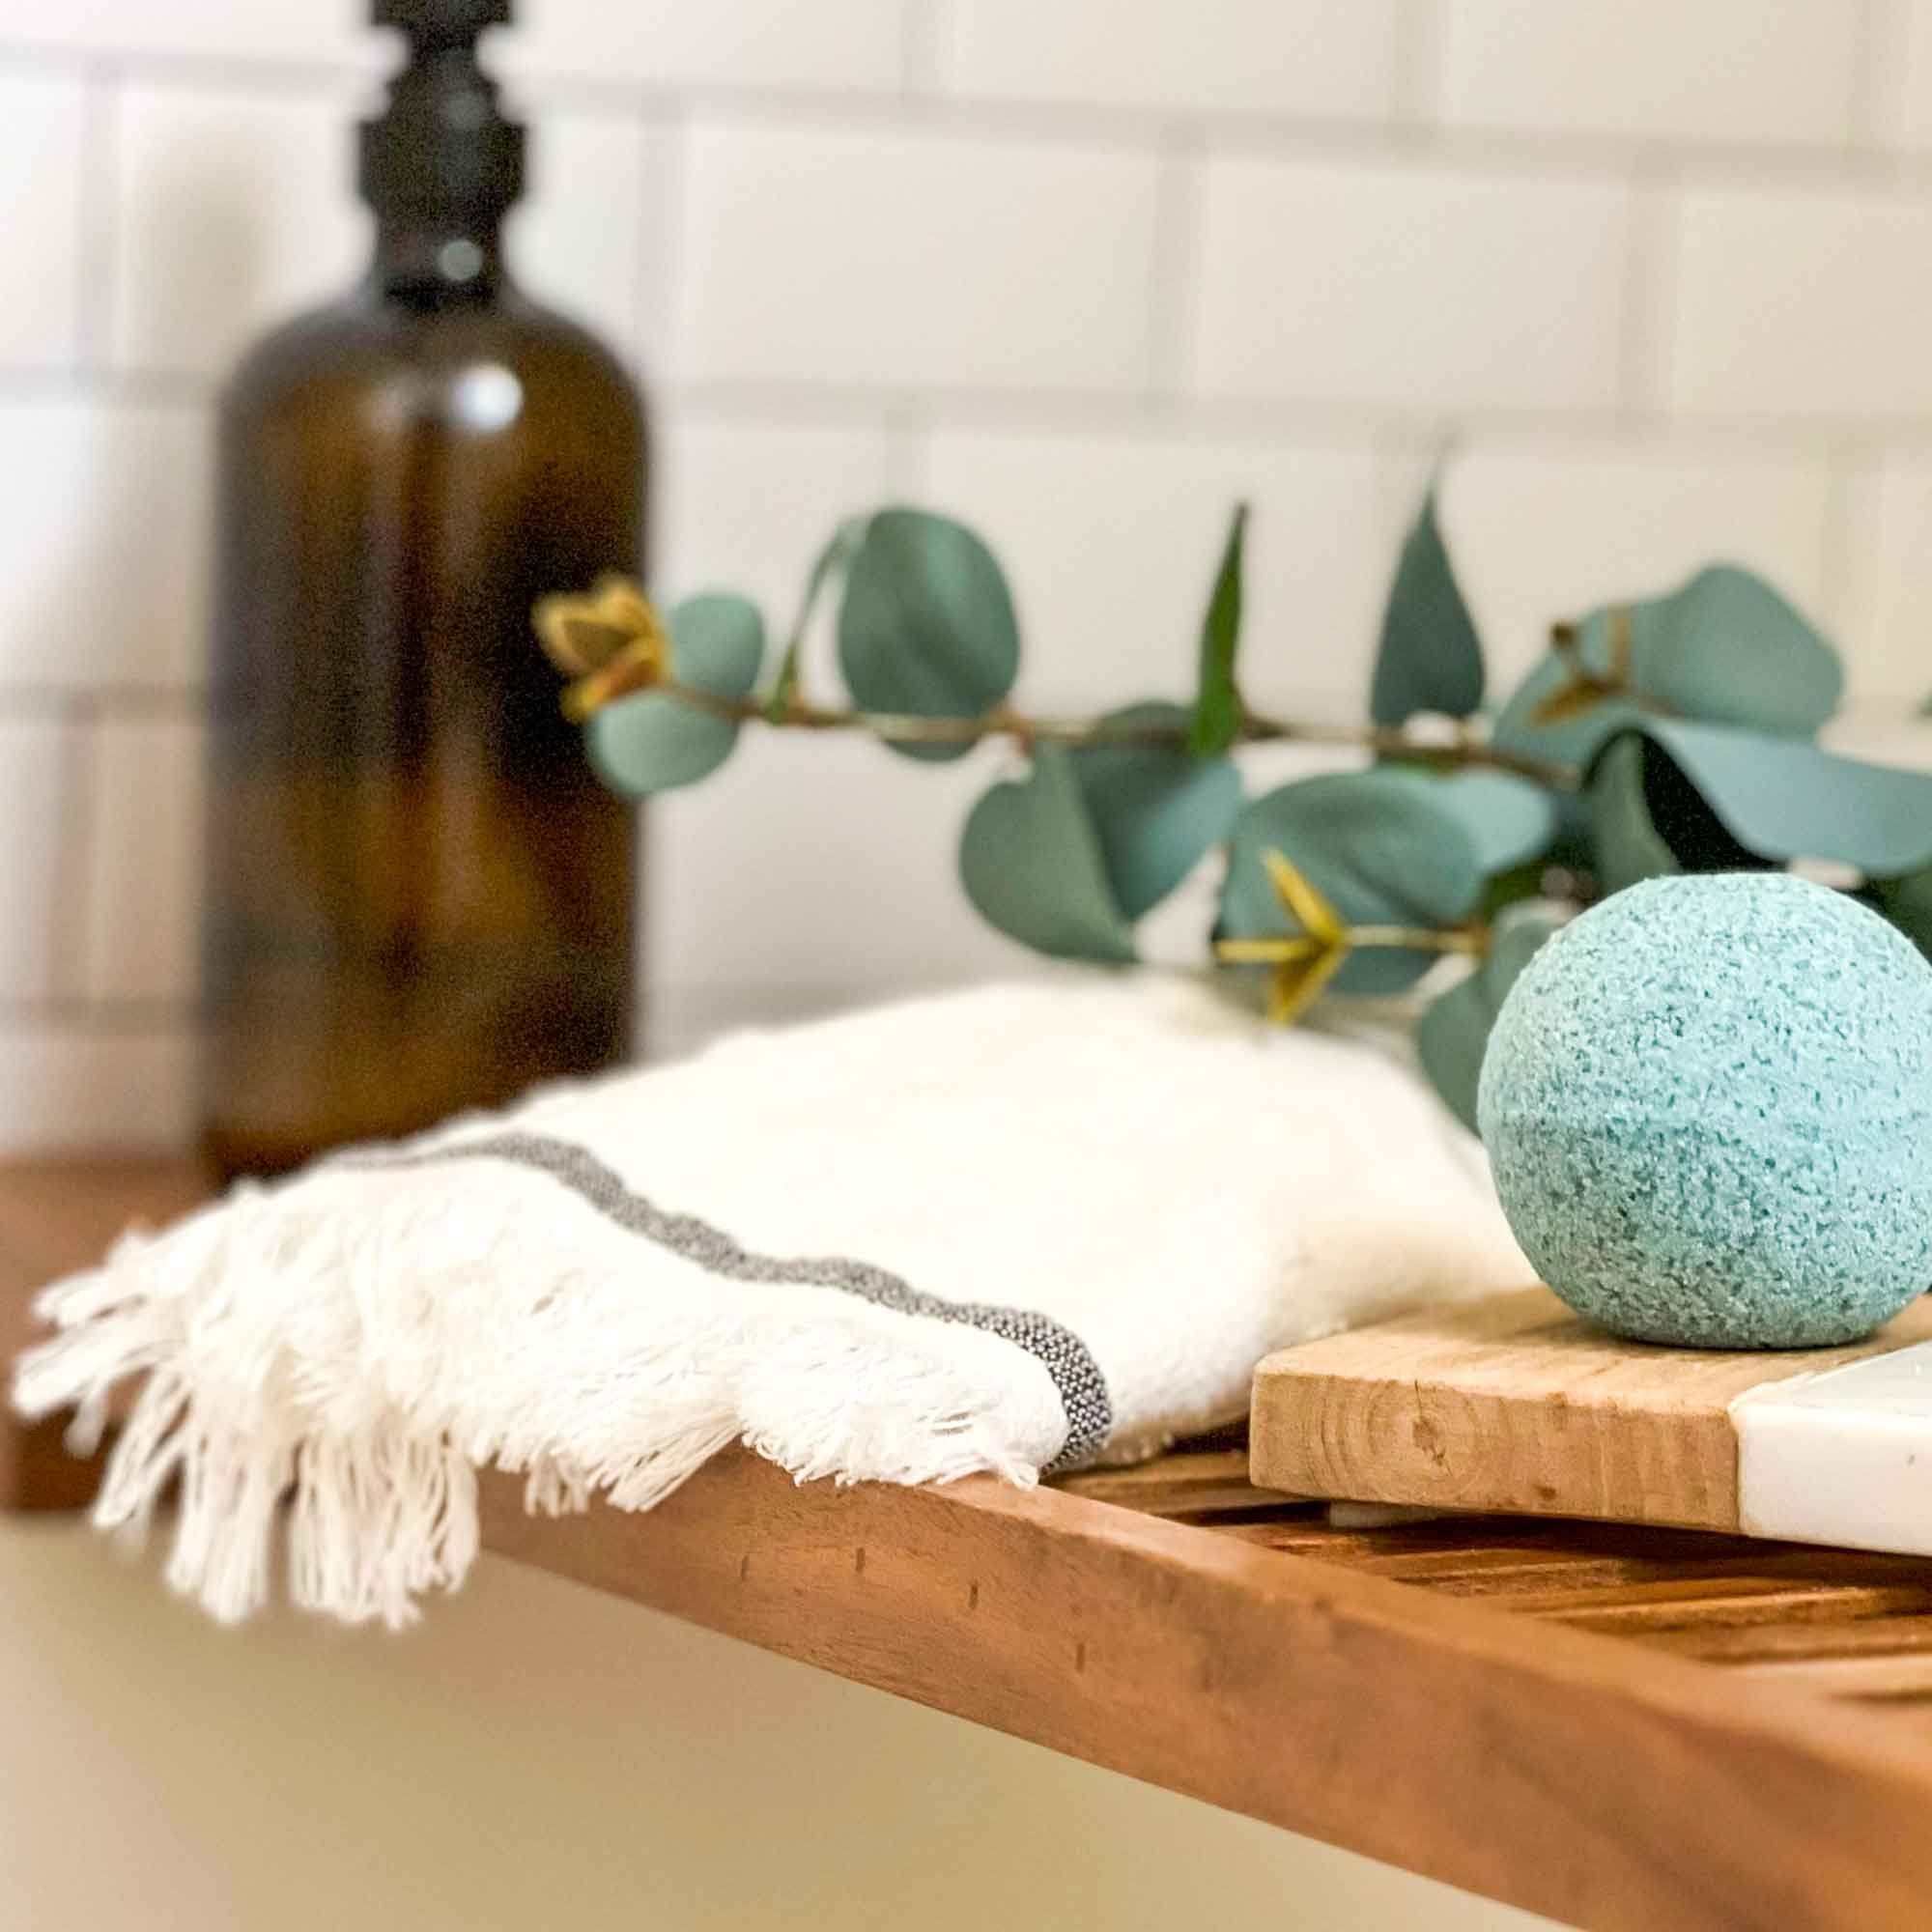 Experience the Refreshing and Soothing Power of Sea Mist Bath Bombs - Handmade with All-Natural Ingredients for a Luxurious Bath